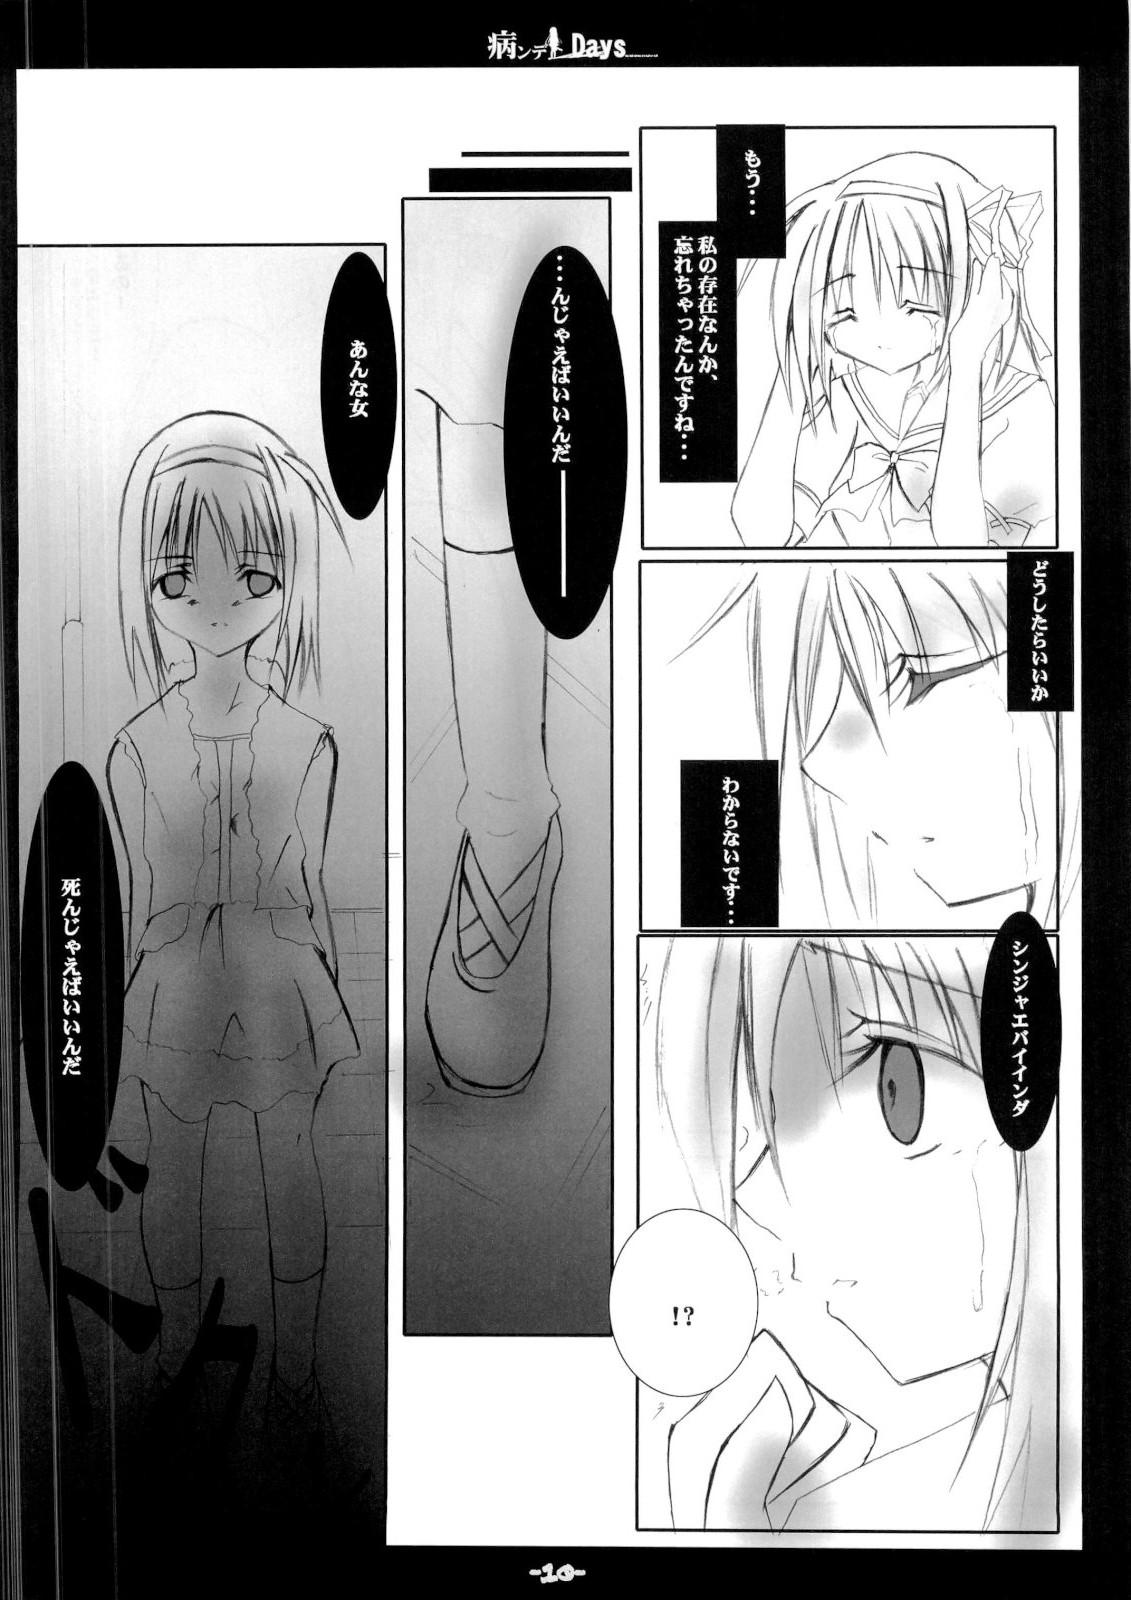 Jerking Off Yandere Days - School days Shuffle Huge Tits - Page 9